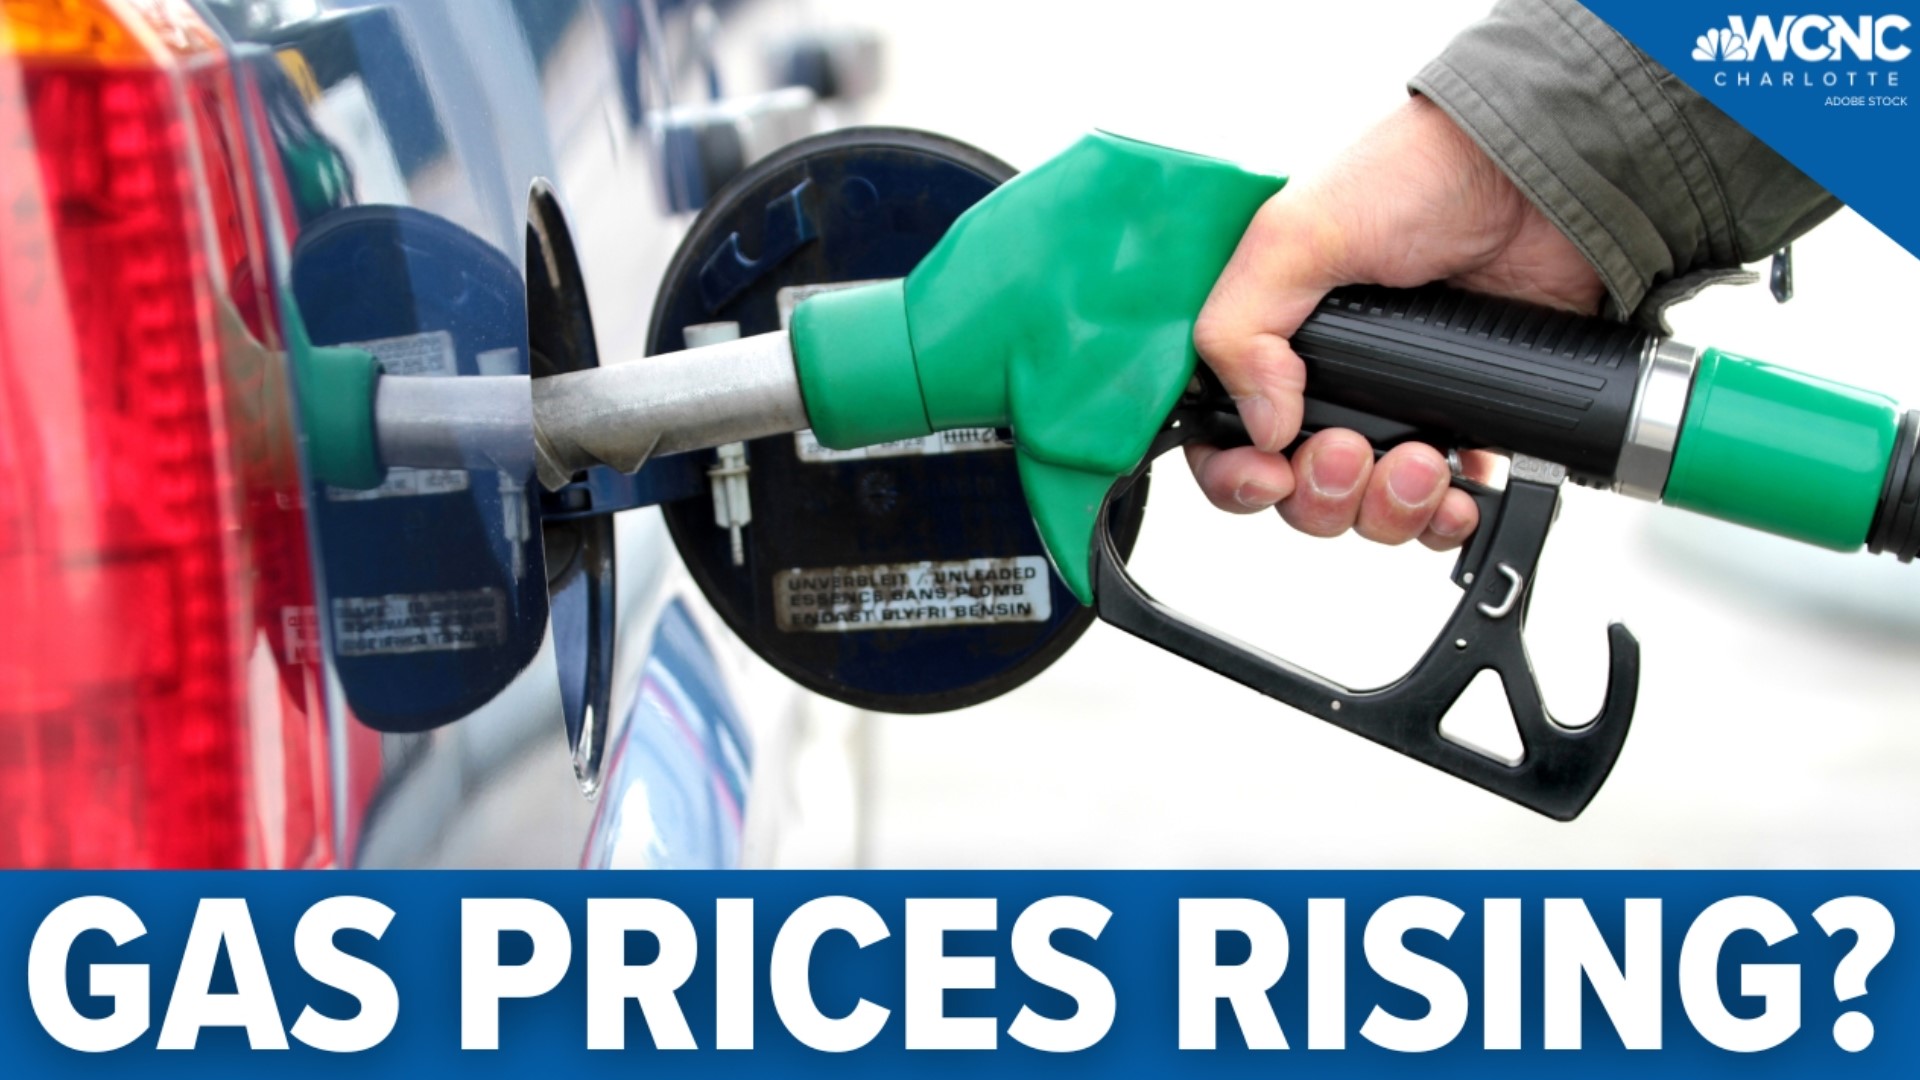 Gas prices across the the nation and the Carolinas are rising again.